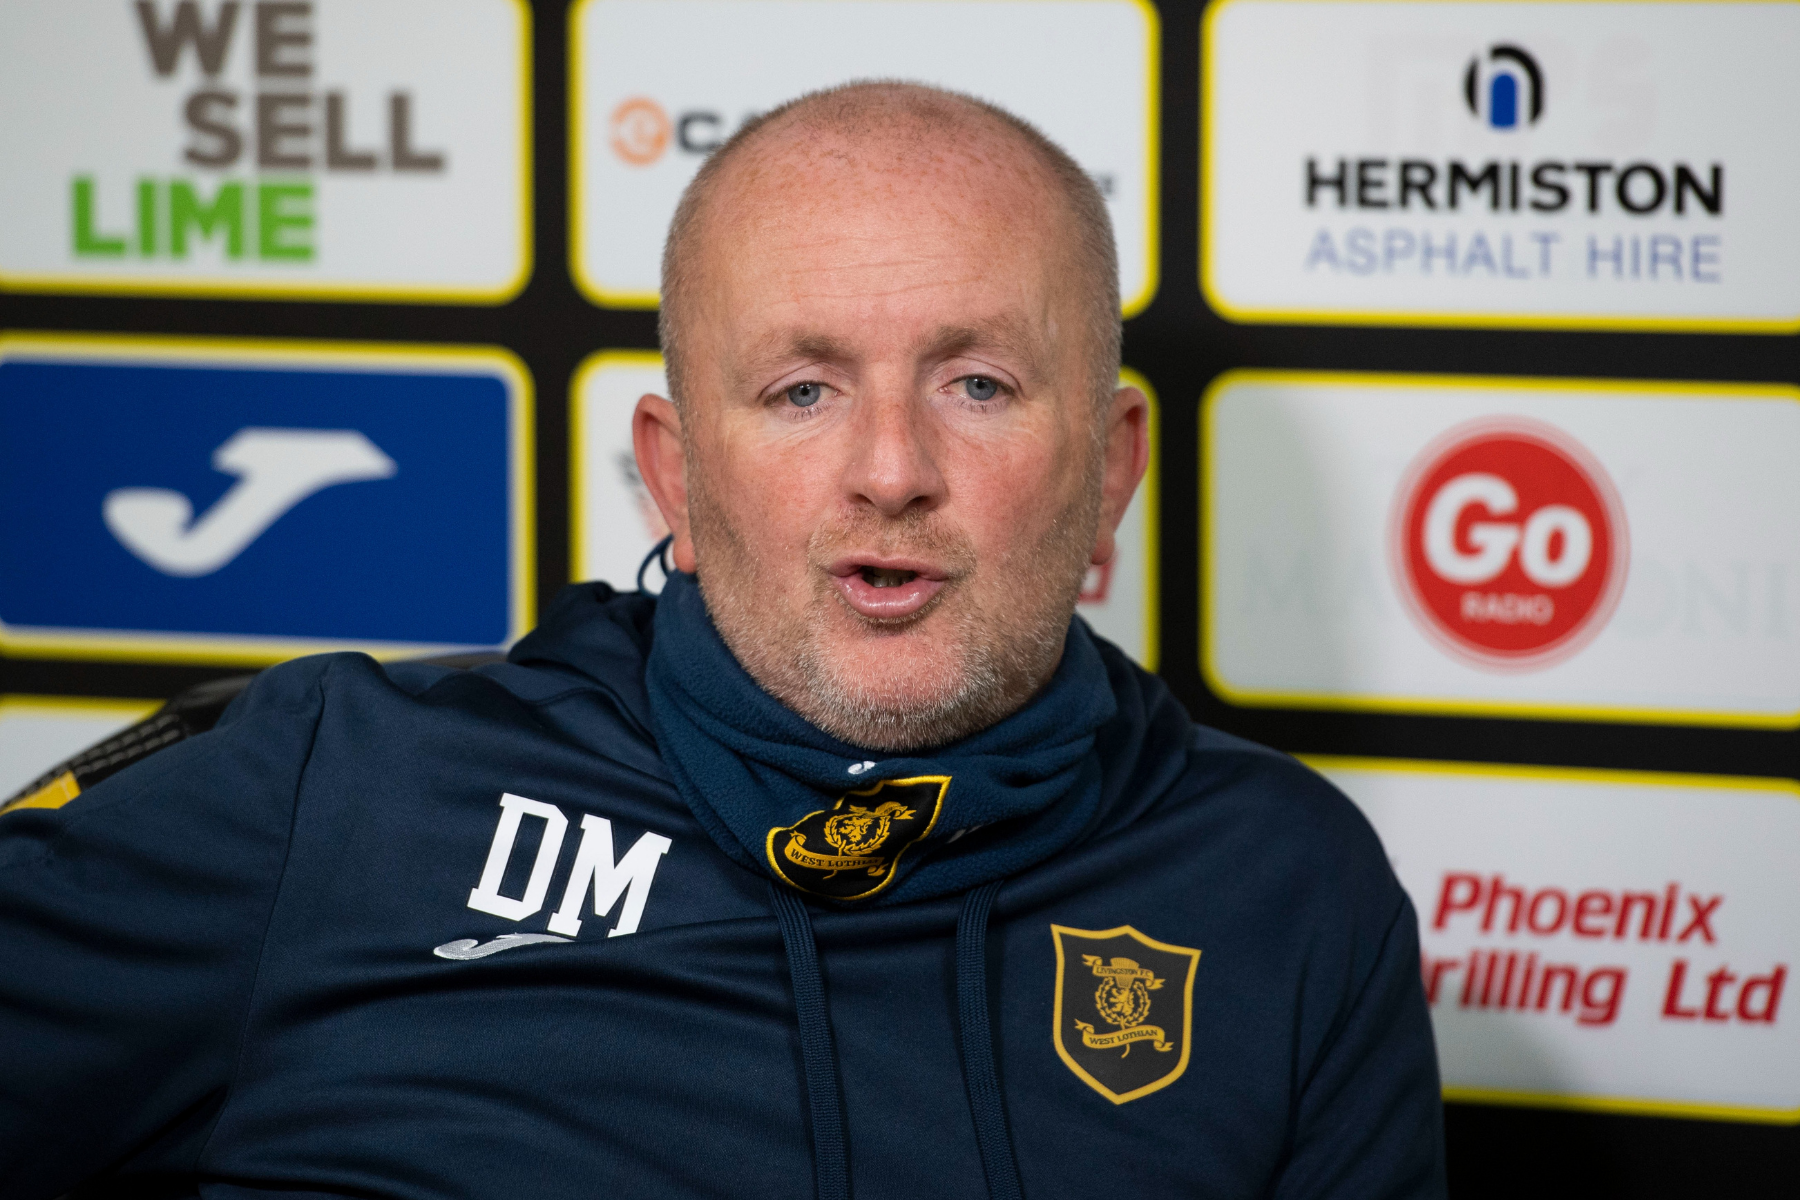 Livingston manager Davie Martindale feels for fans caught up in distressing scenes before Champions League final